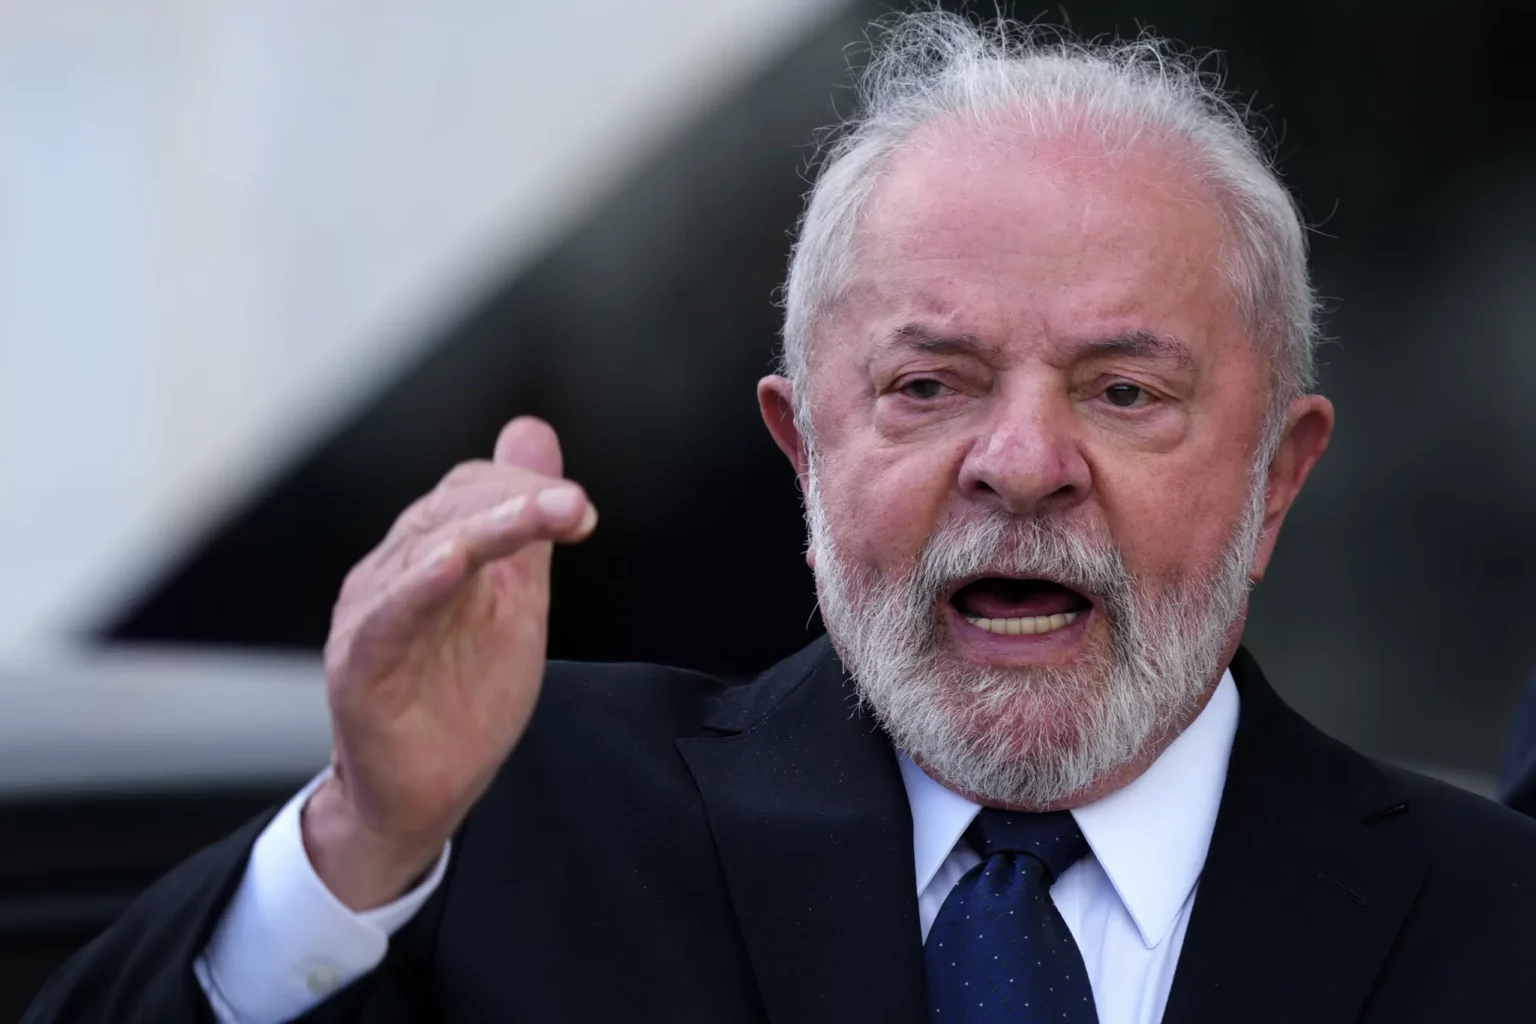 brazils-president-lula-condemns-the-invasion-of-ukraine-and-calls-for-mediation-to-end-the-war